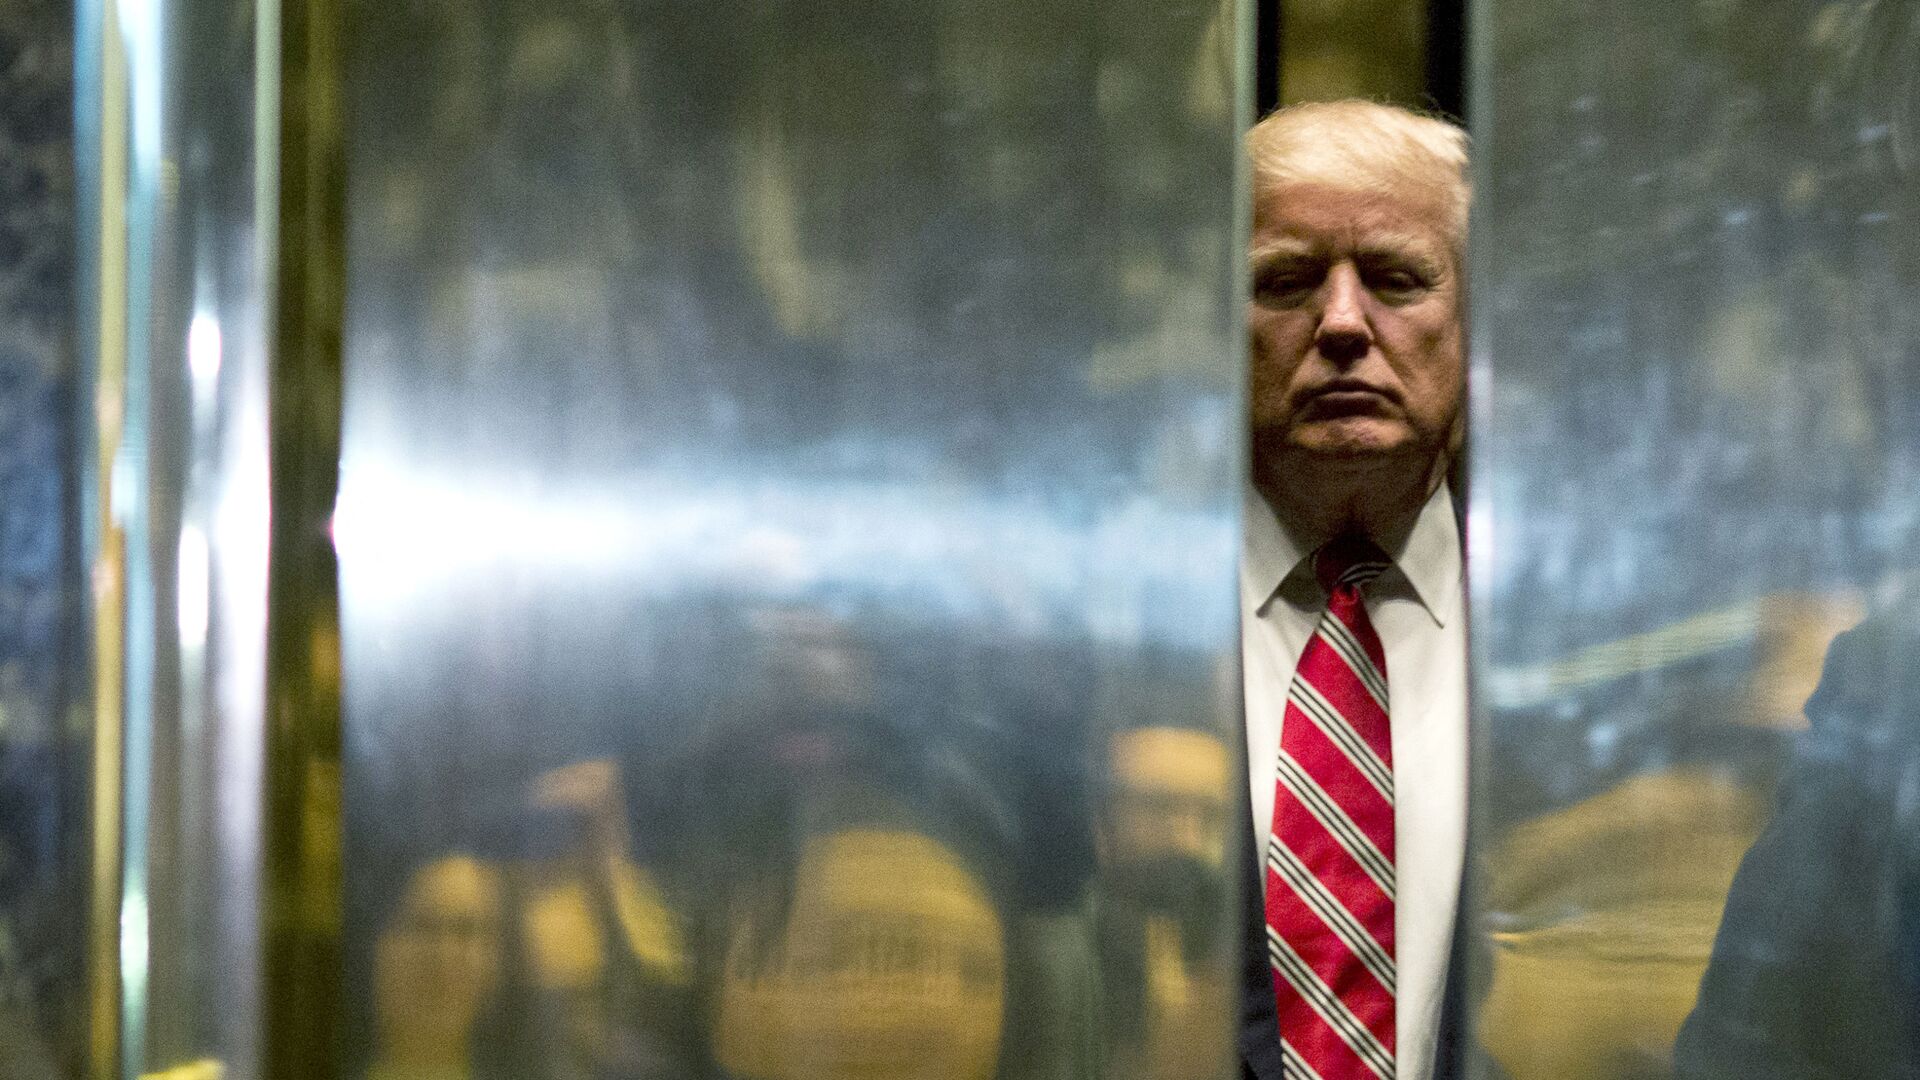 In this file photo taken on January 16, 2017 US President-elect Donald Trump boards the elevator after escorting Martin Luther King III to the lobby after meetings at Trump Tower in New York City. - The Trump Organization is being investigated in a criminal capacity as New York prosecutors advance their probe into former president Donald Trump's business dealings, the state attorney general announced Tuesday. We have informed the Trump Organization that our investigation into the organization is no longer purely civil in nature, a spokesman for Attorney General Letitia James' office said. We are now actively investigating the Trump Organization in a criminal capacity, along with the Manhattan DA. - Sputnik International, 1920, 19.05.2021